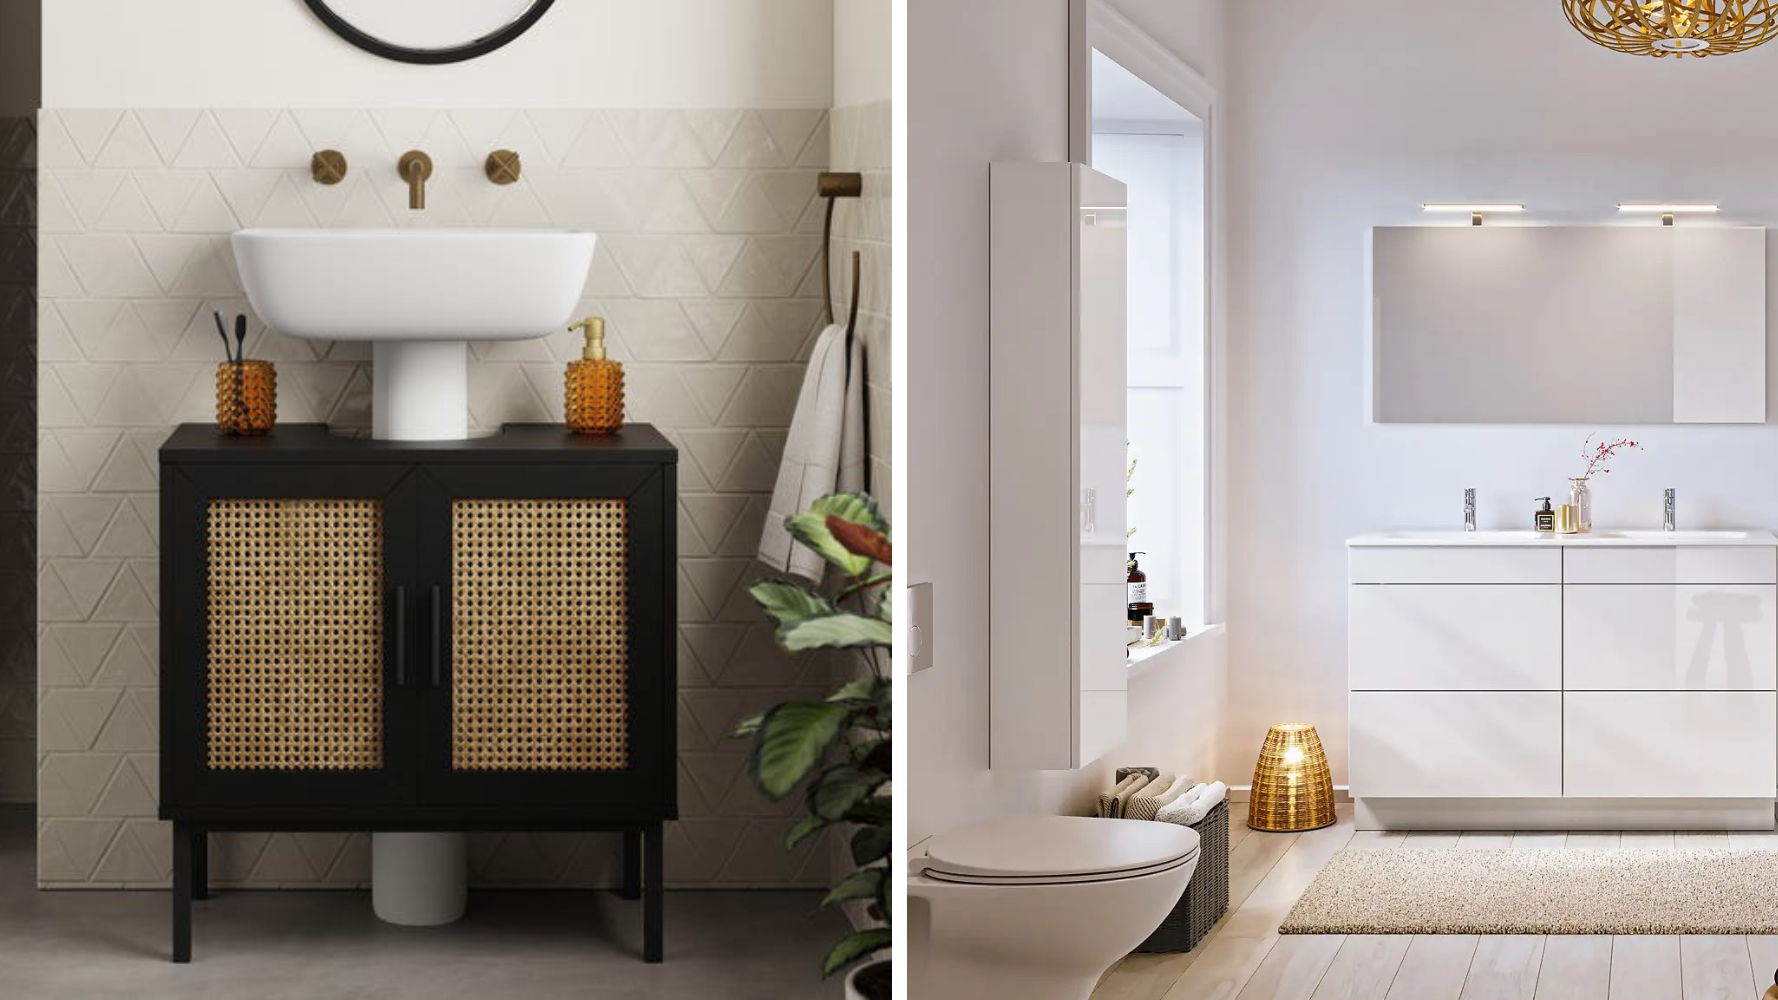 15 Over the Toilet Storage Ideas That Actually Look Amazing